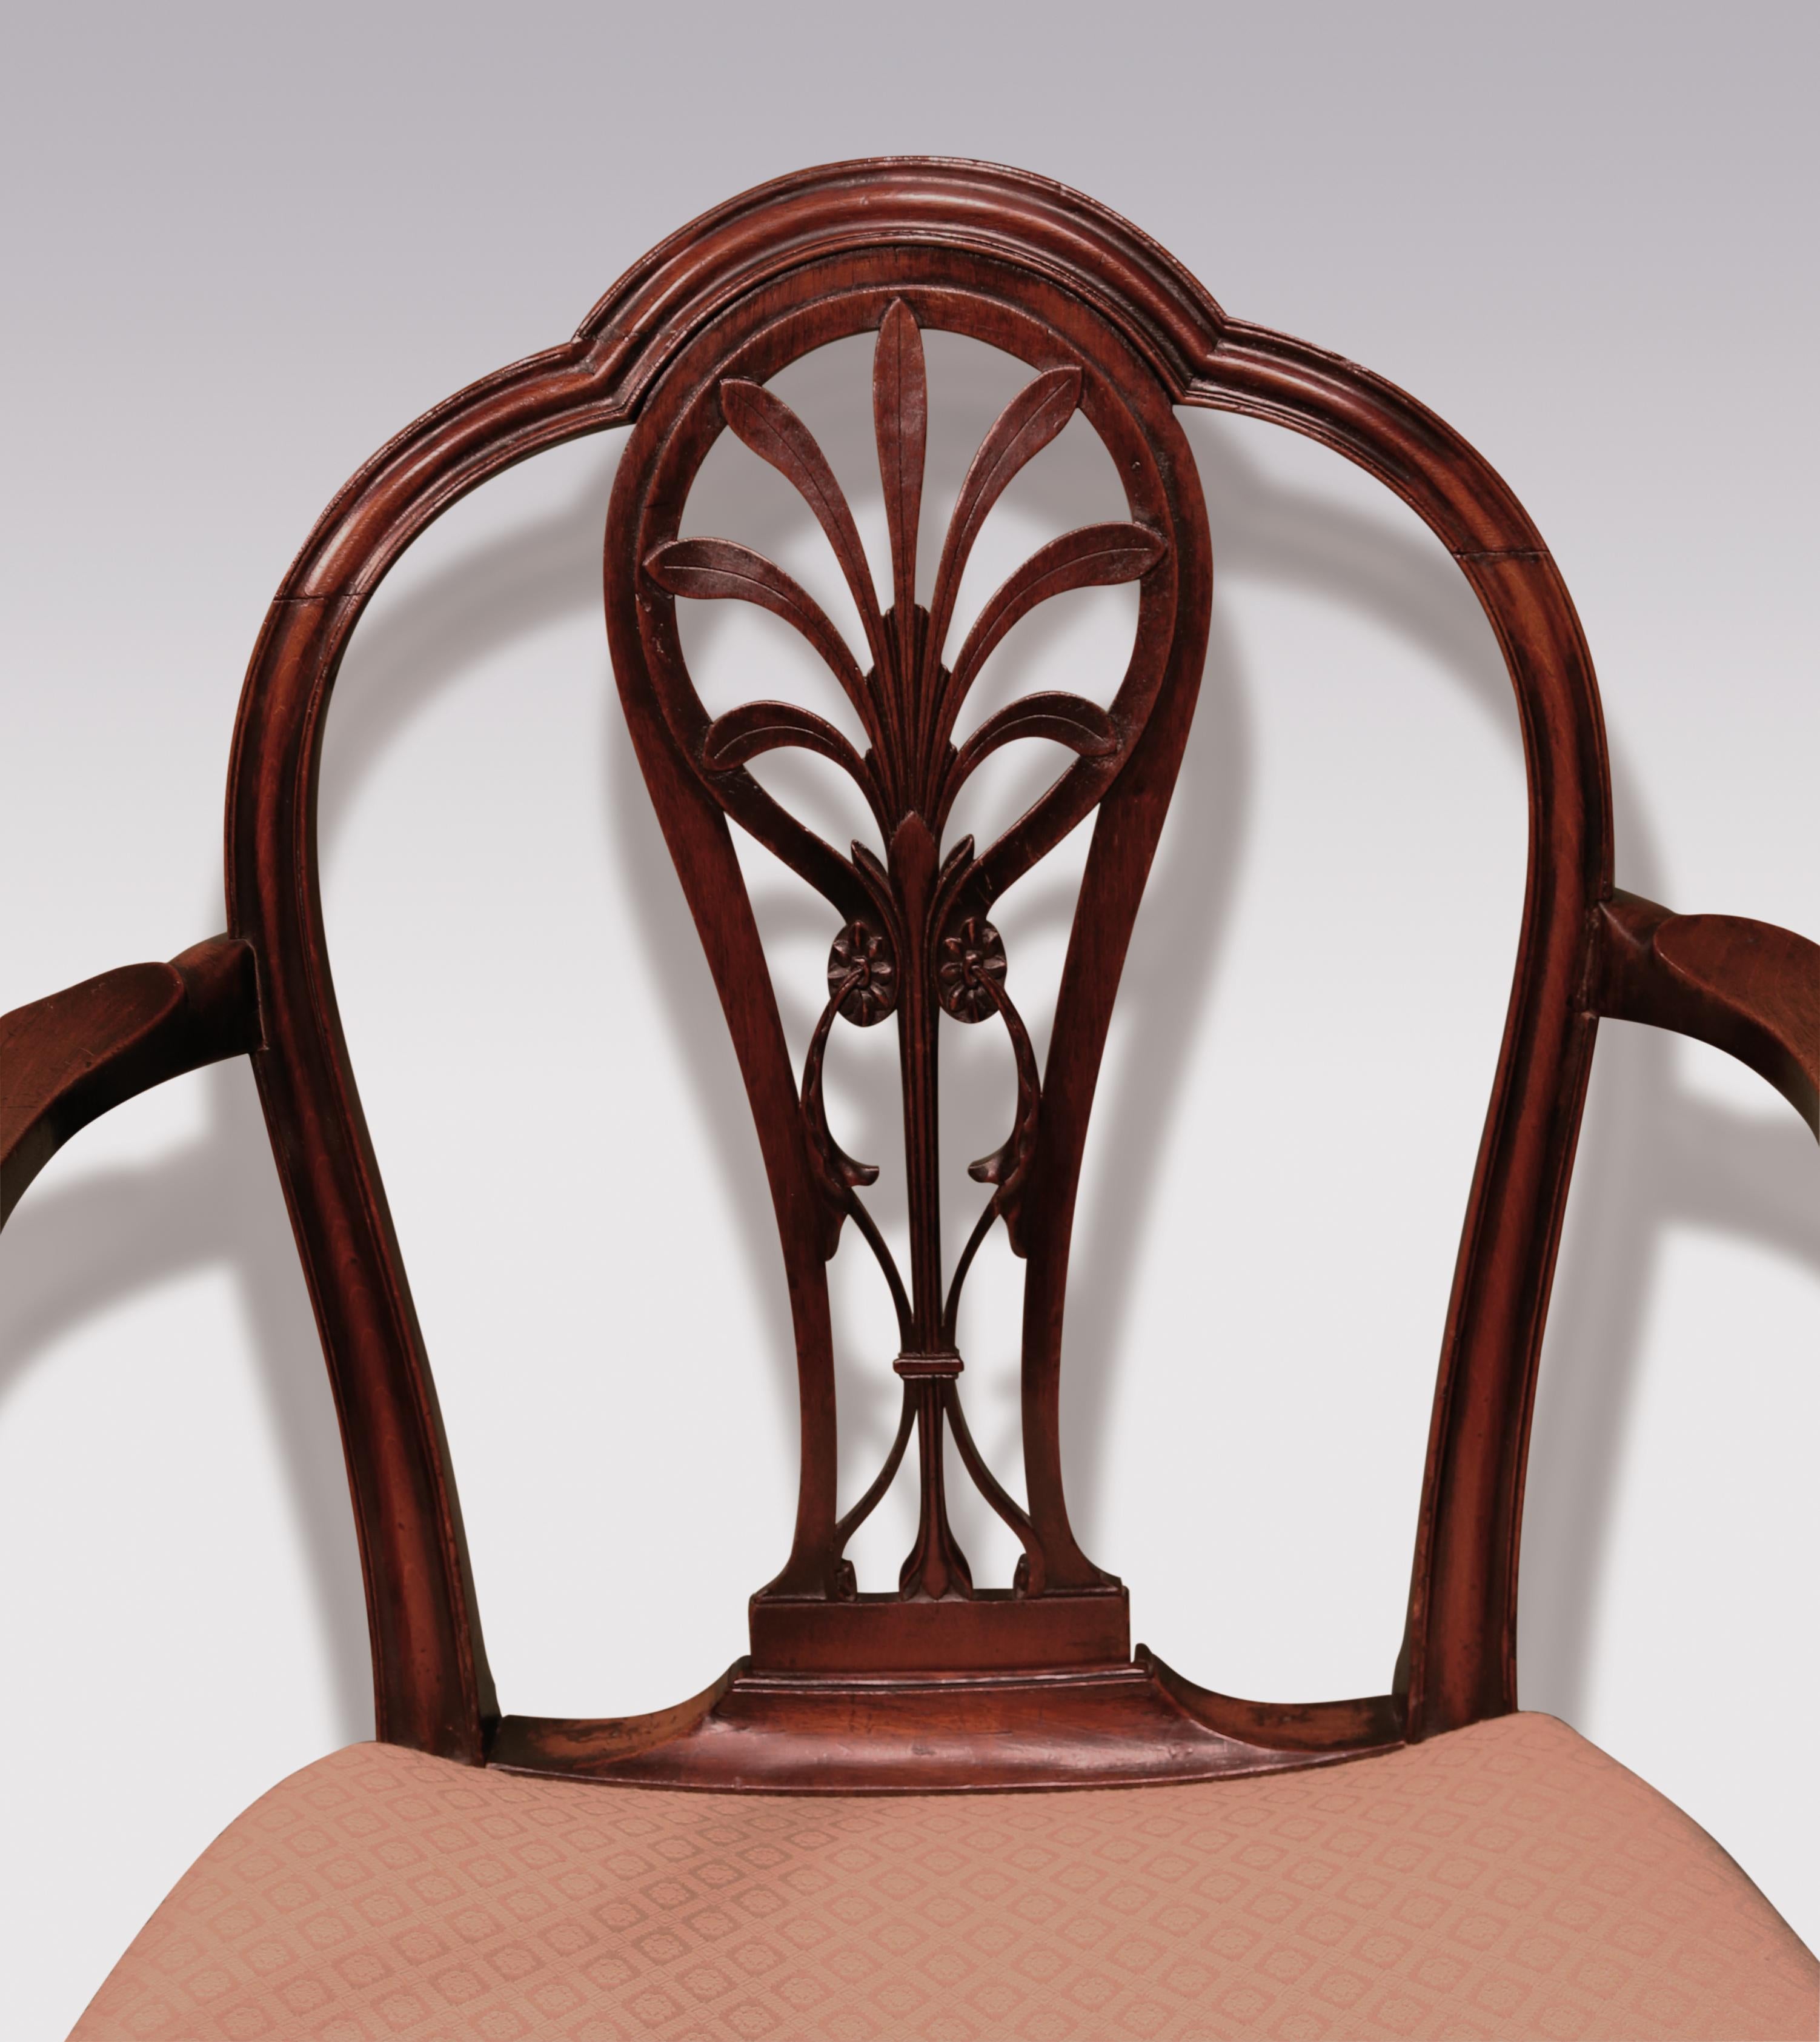 A late 18th century George III period mahogany armchair, having double arched back above central splat, finely carved with anthemion paterae & acanthus. The chair having well-shaped & moulded set-back arms with serpentine saddled seat, supported on